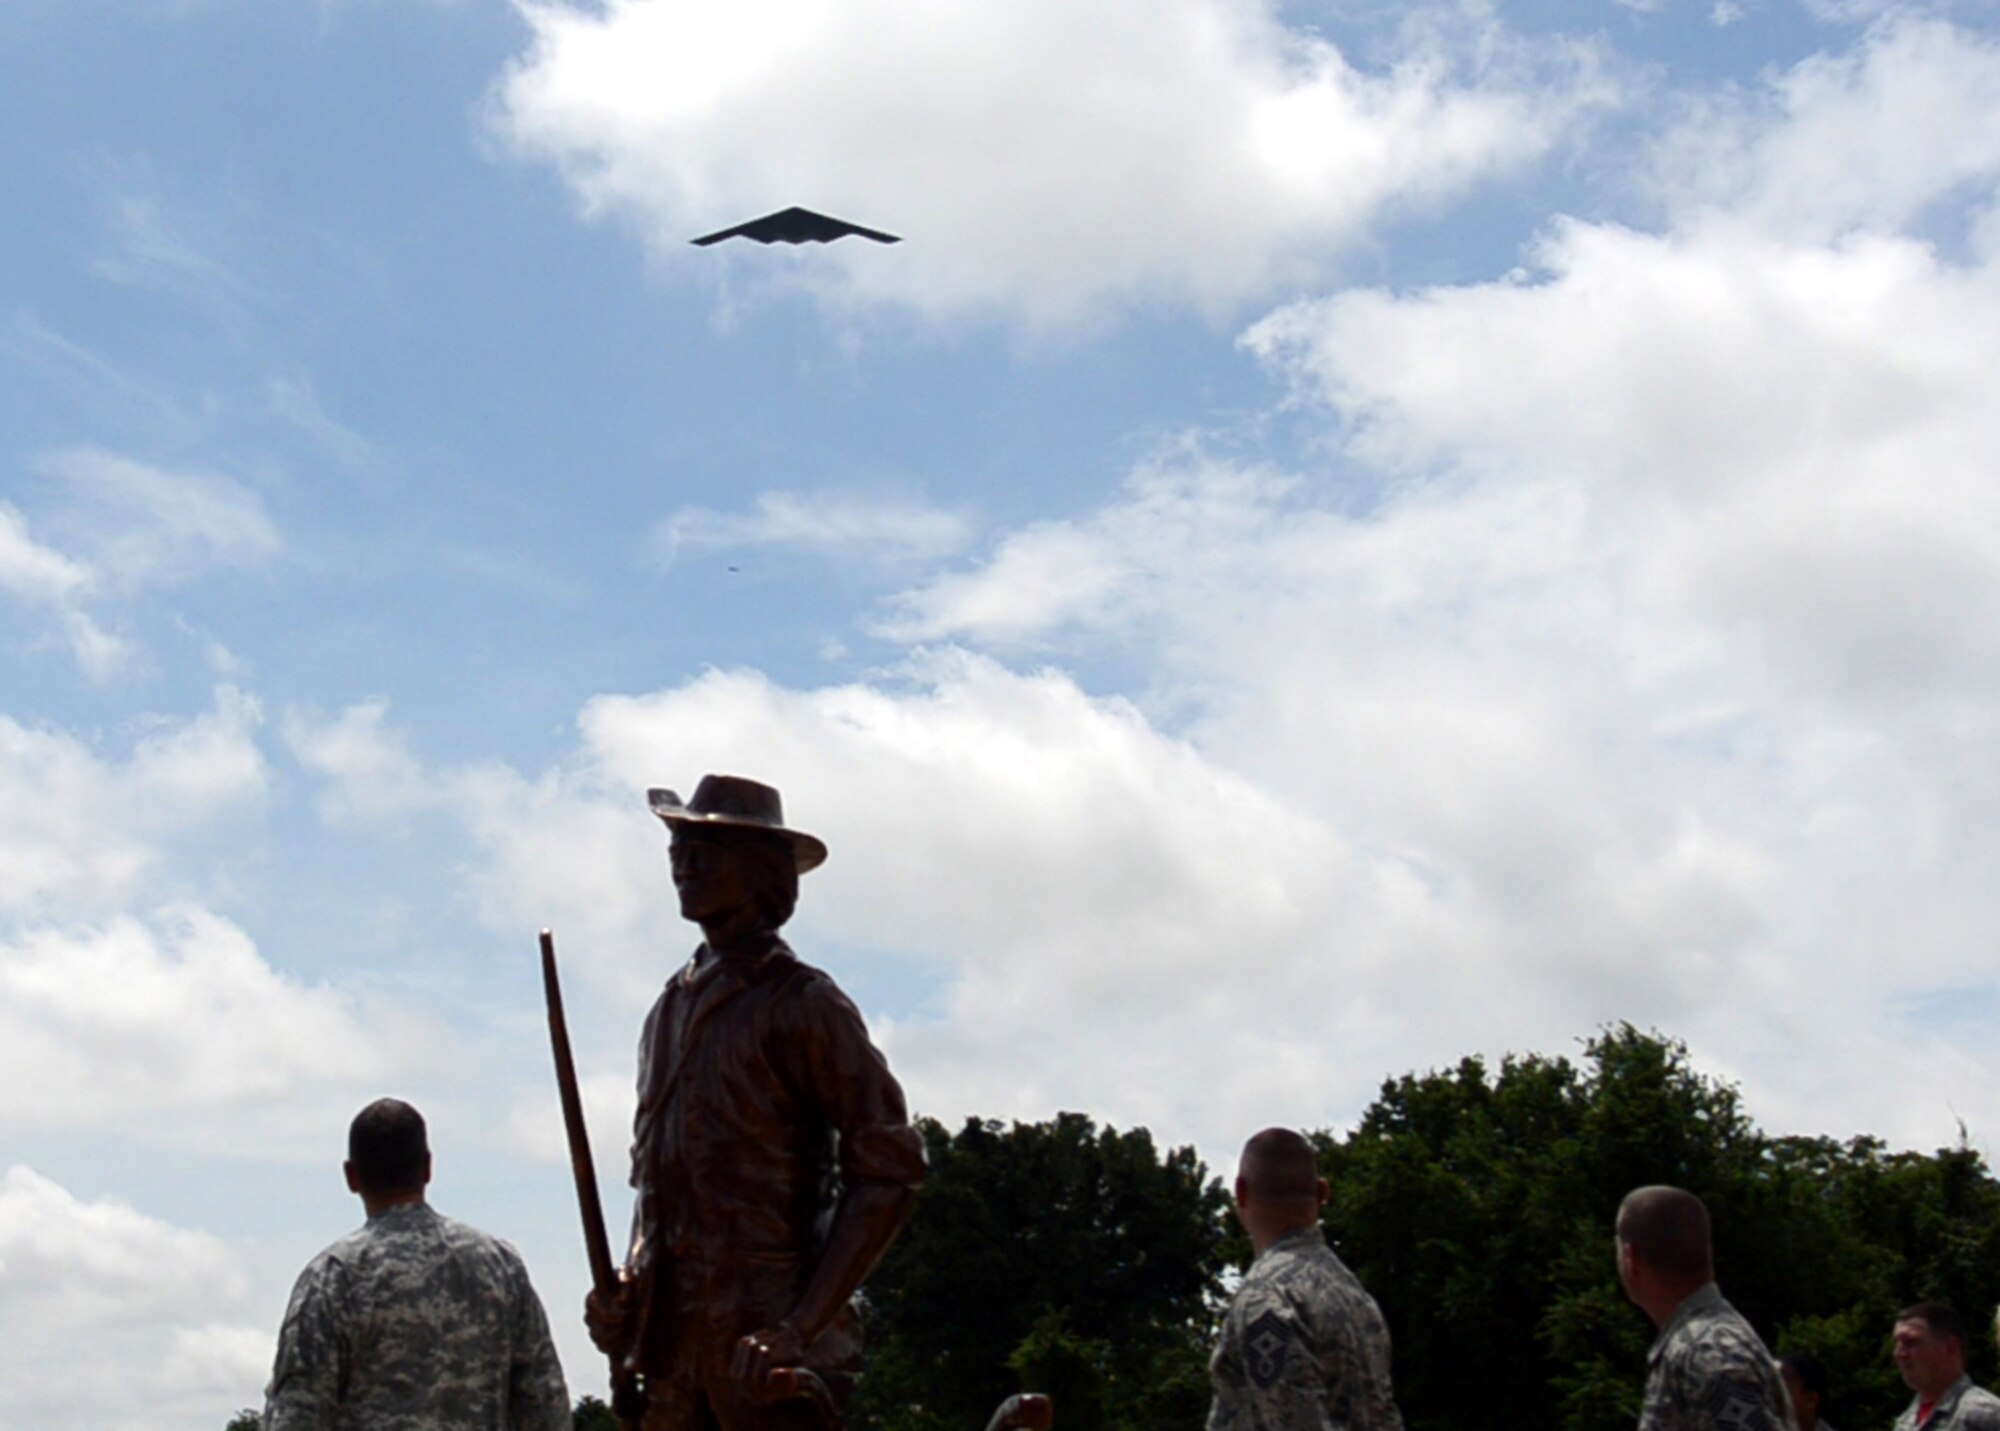 The B-2 Spirit stealth bomber flies overhead the newly-dedicated 131st Bomb Wing Heritage Park as Maj. Gen. Steve Danner, adjutant general of Missouri, Chief Master Sgt. Paul Joseph Sluder, Missouri Air National Guard command chief, and Chief Master Sgt. Paul Carney, 131st Bomb Wing command chief, look on at Whiteman Air Force Base, Mo., June 12, 2015.  The ceremony dedicated three jets that have been a part of the 131st culture and are now a permanent part of Whiteman.  